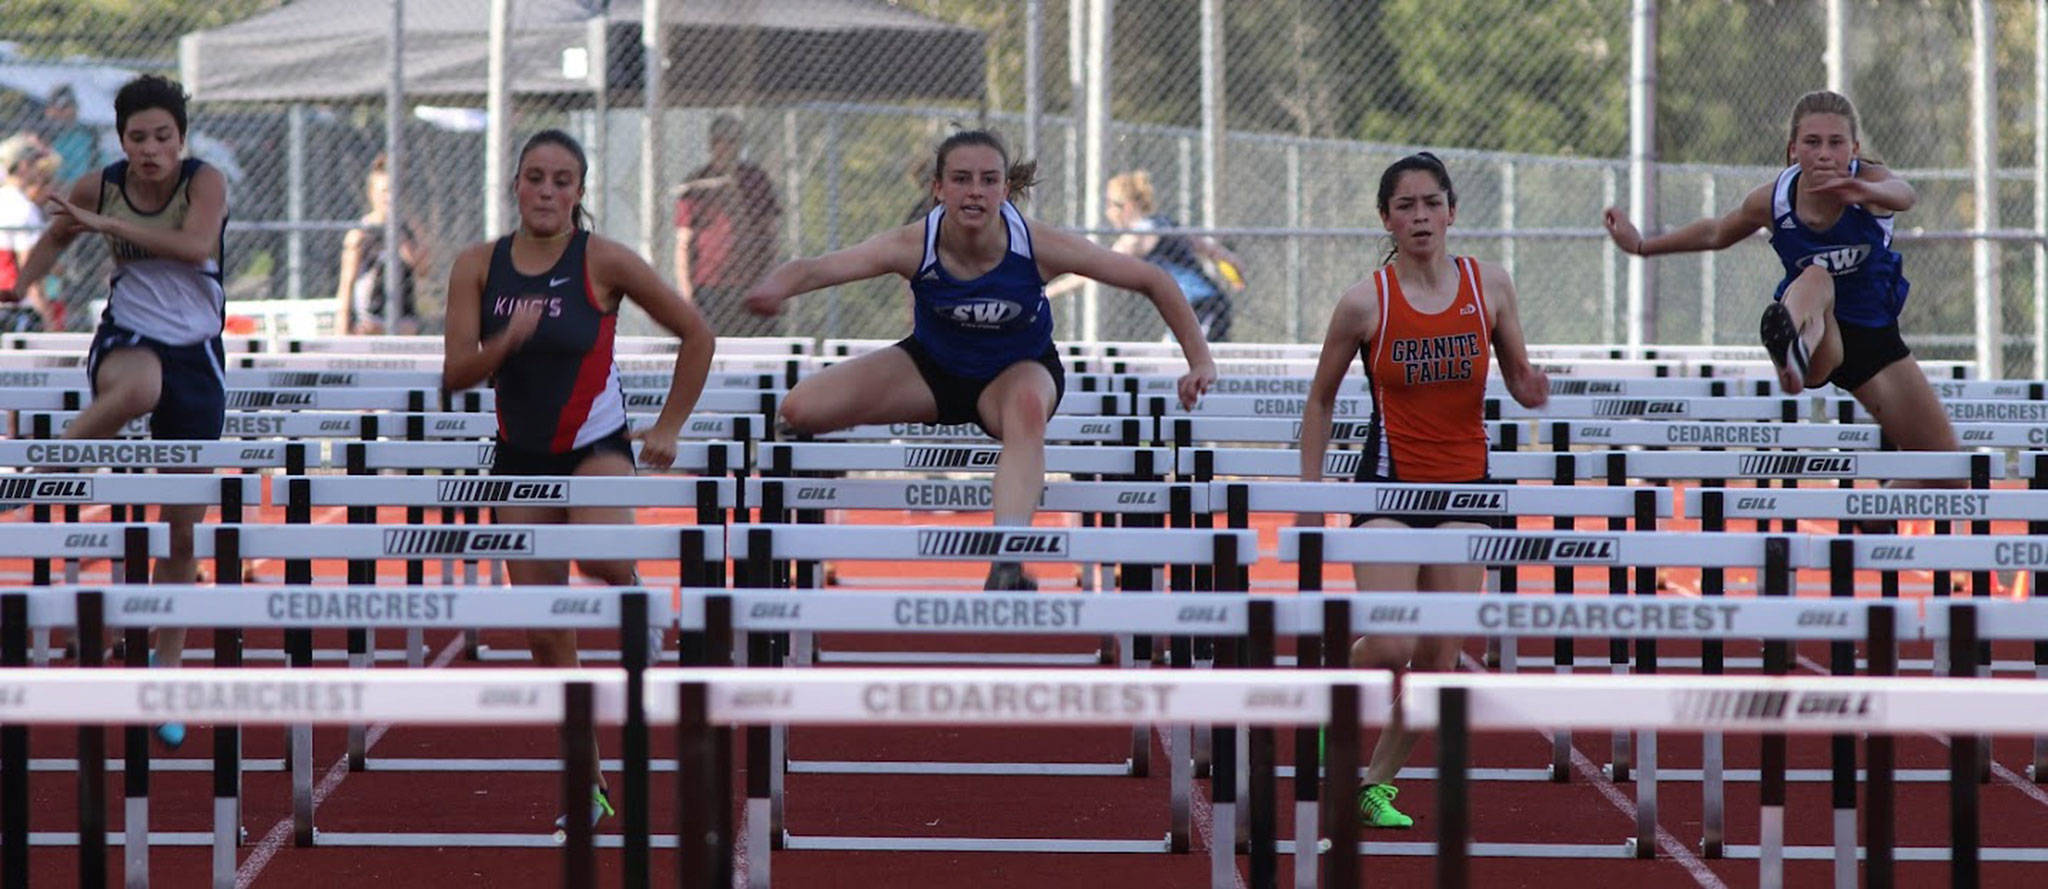 South Whidbey’s Sophia Nielsen, center, sails to first place in the 100 hurdles at the league meet Thursday. (Photo by Matt Simms)